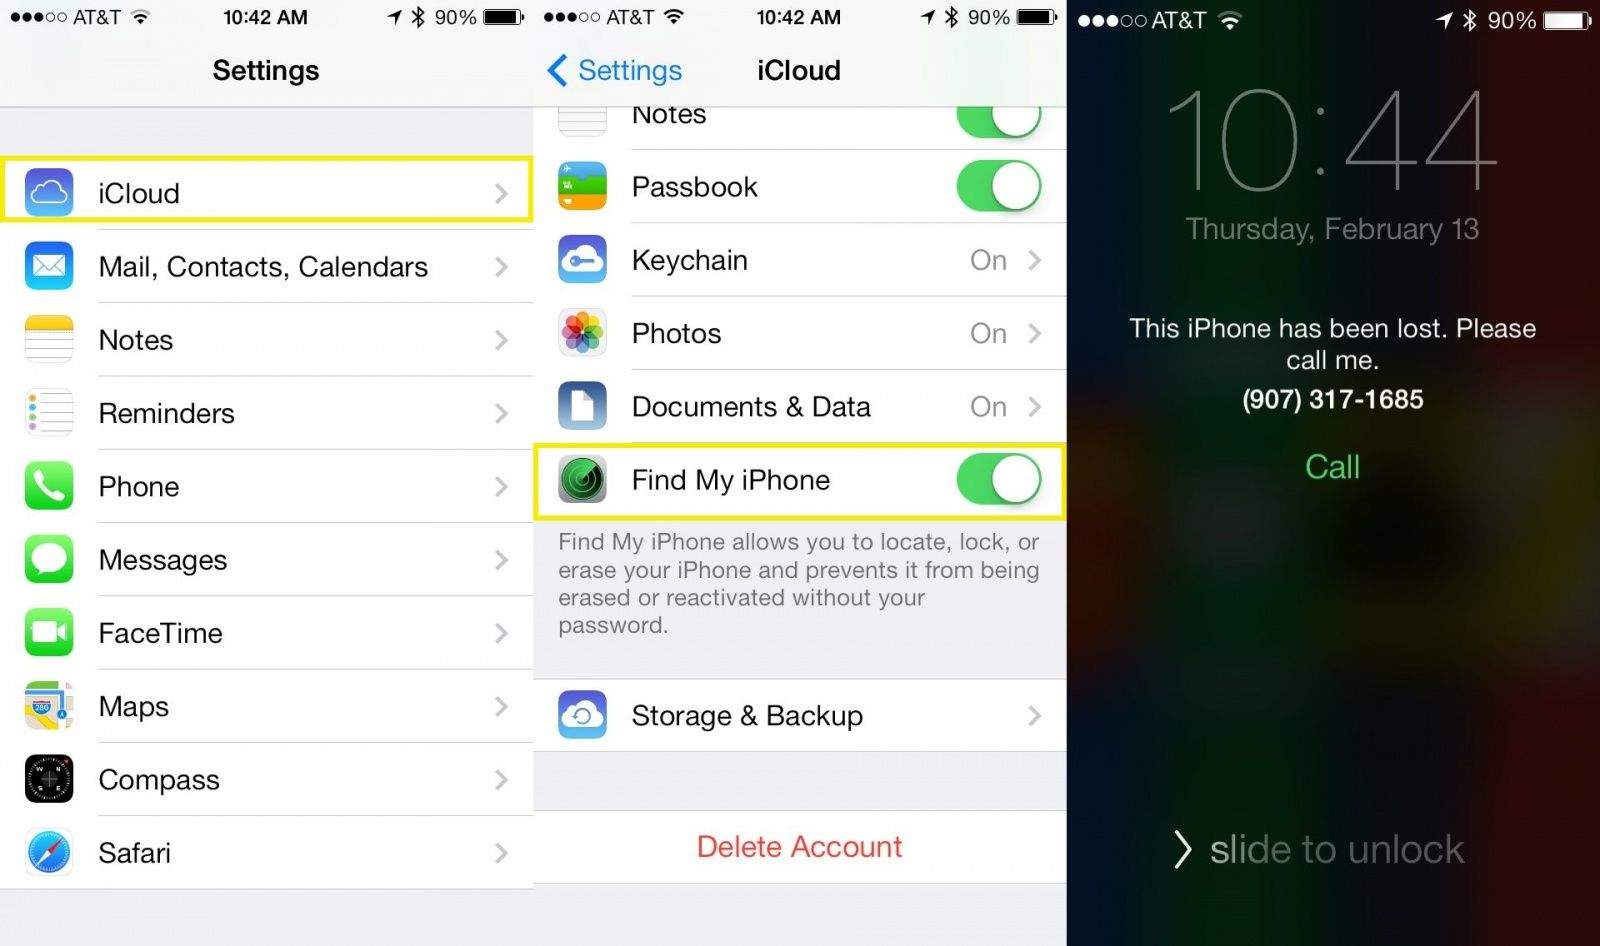 Every iPhone user with iOS 10 must follow these Security Tips